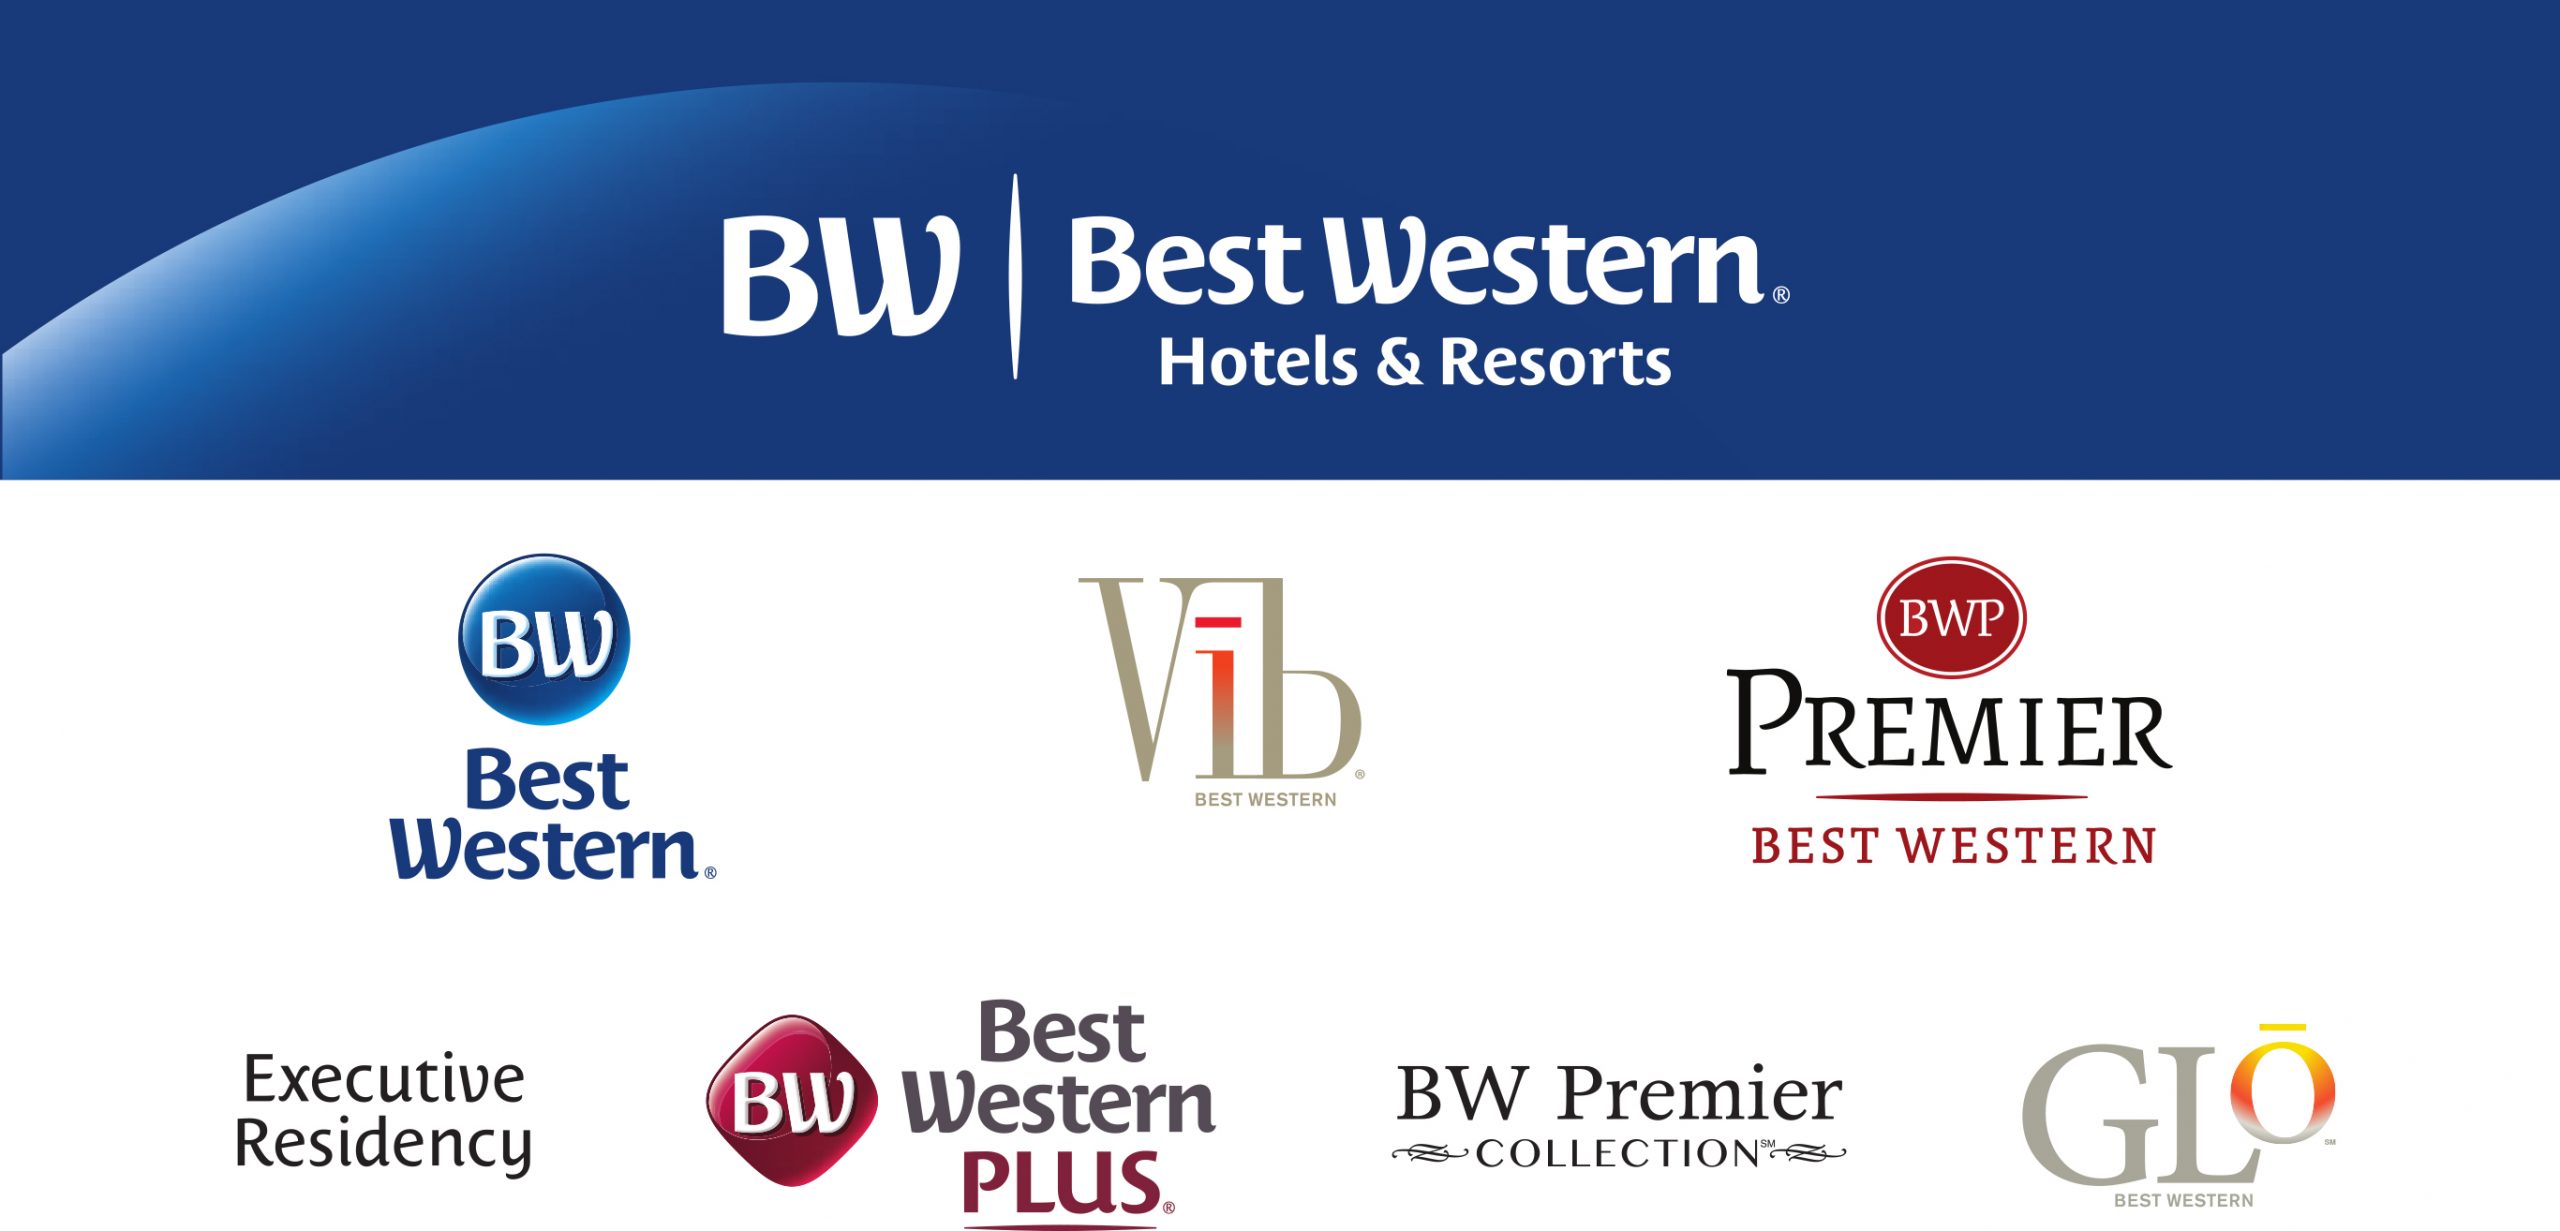 best western top 10 the gioi quan ly van hanh khach san resorts1 scaled